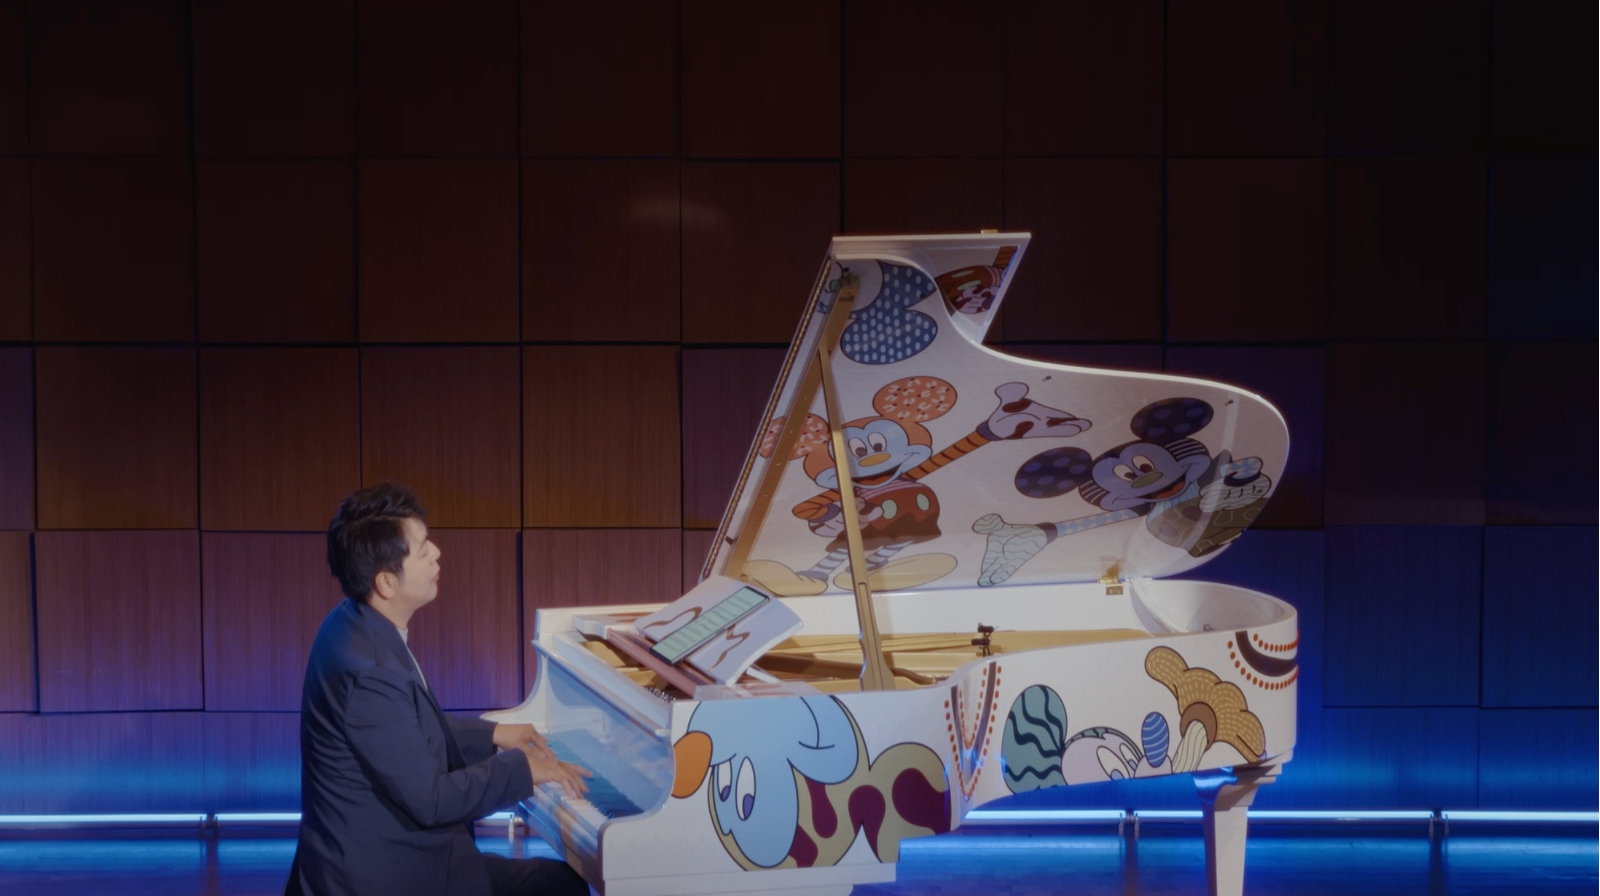 Lang Lang Plays “We Don’t Talk About Bruno” on the Steinway x Disney: Mickey Mouse Limited Edition Piano